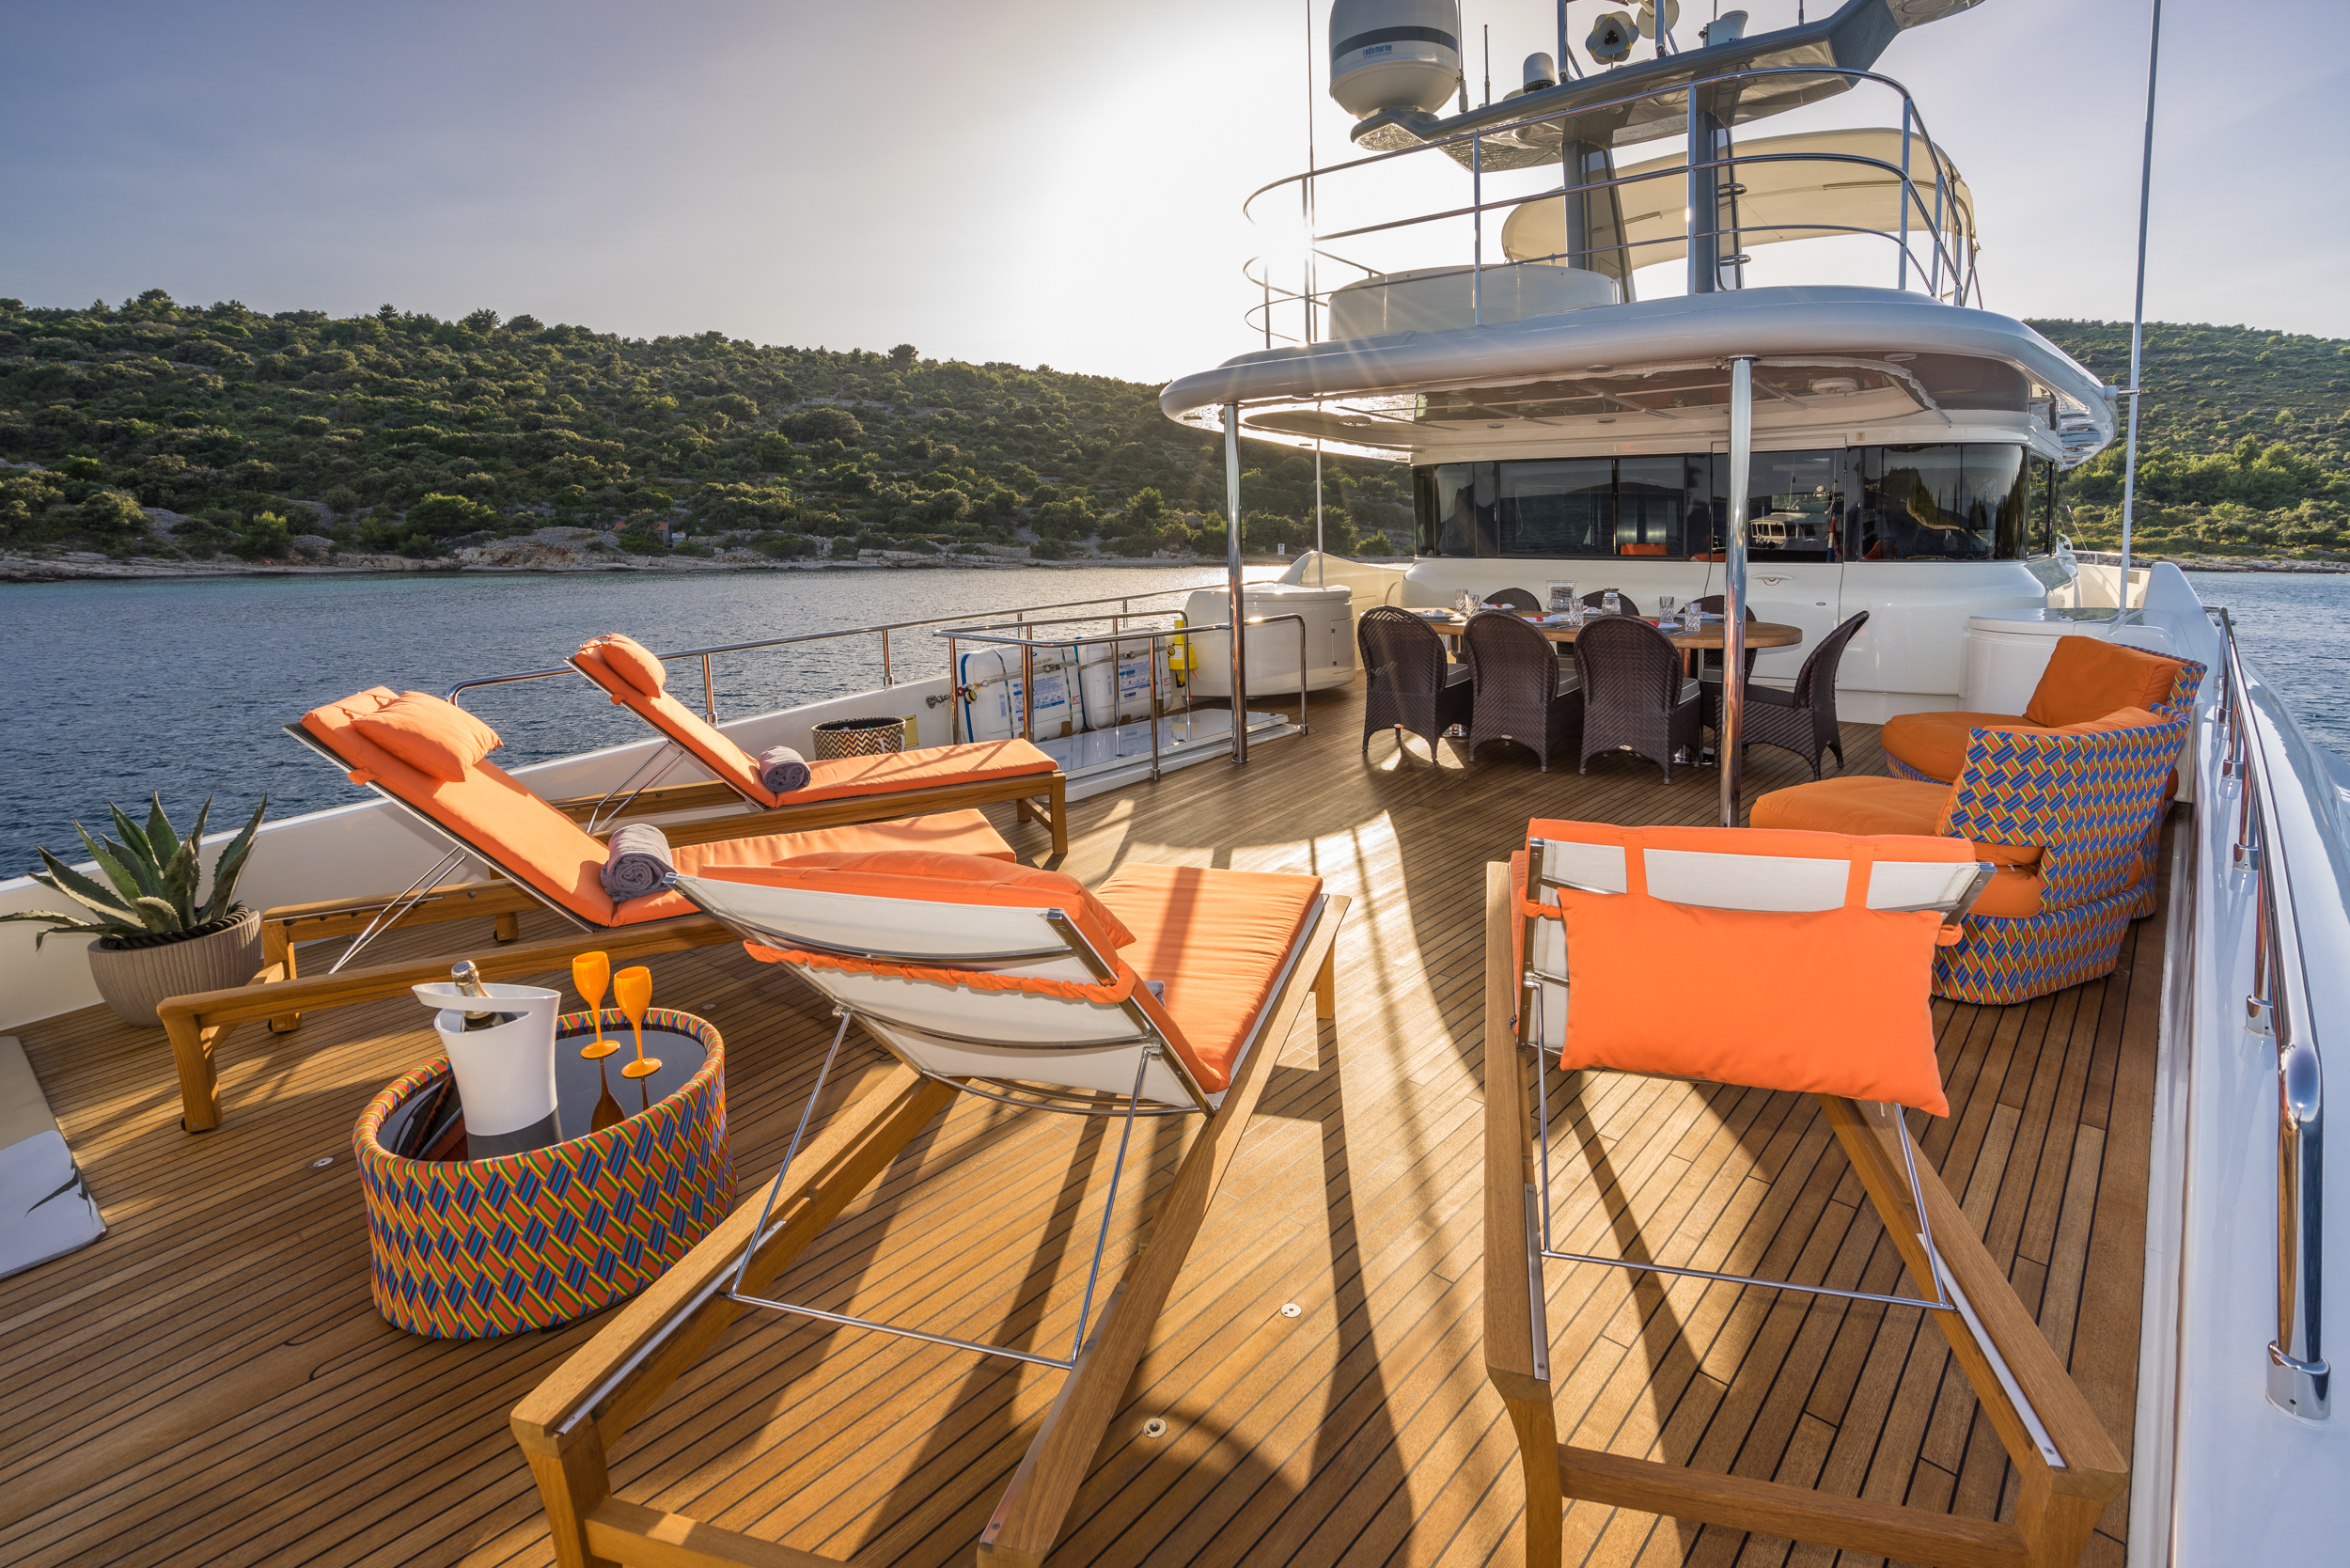 Aft Deck Dining And Sunbathing Area